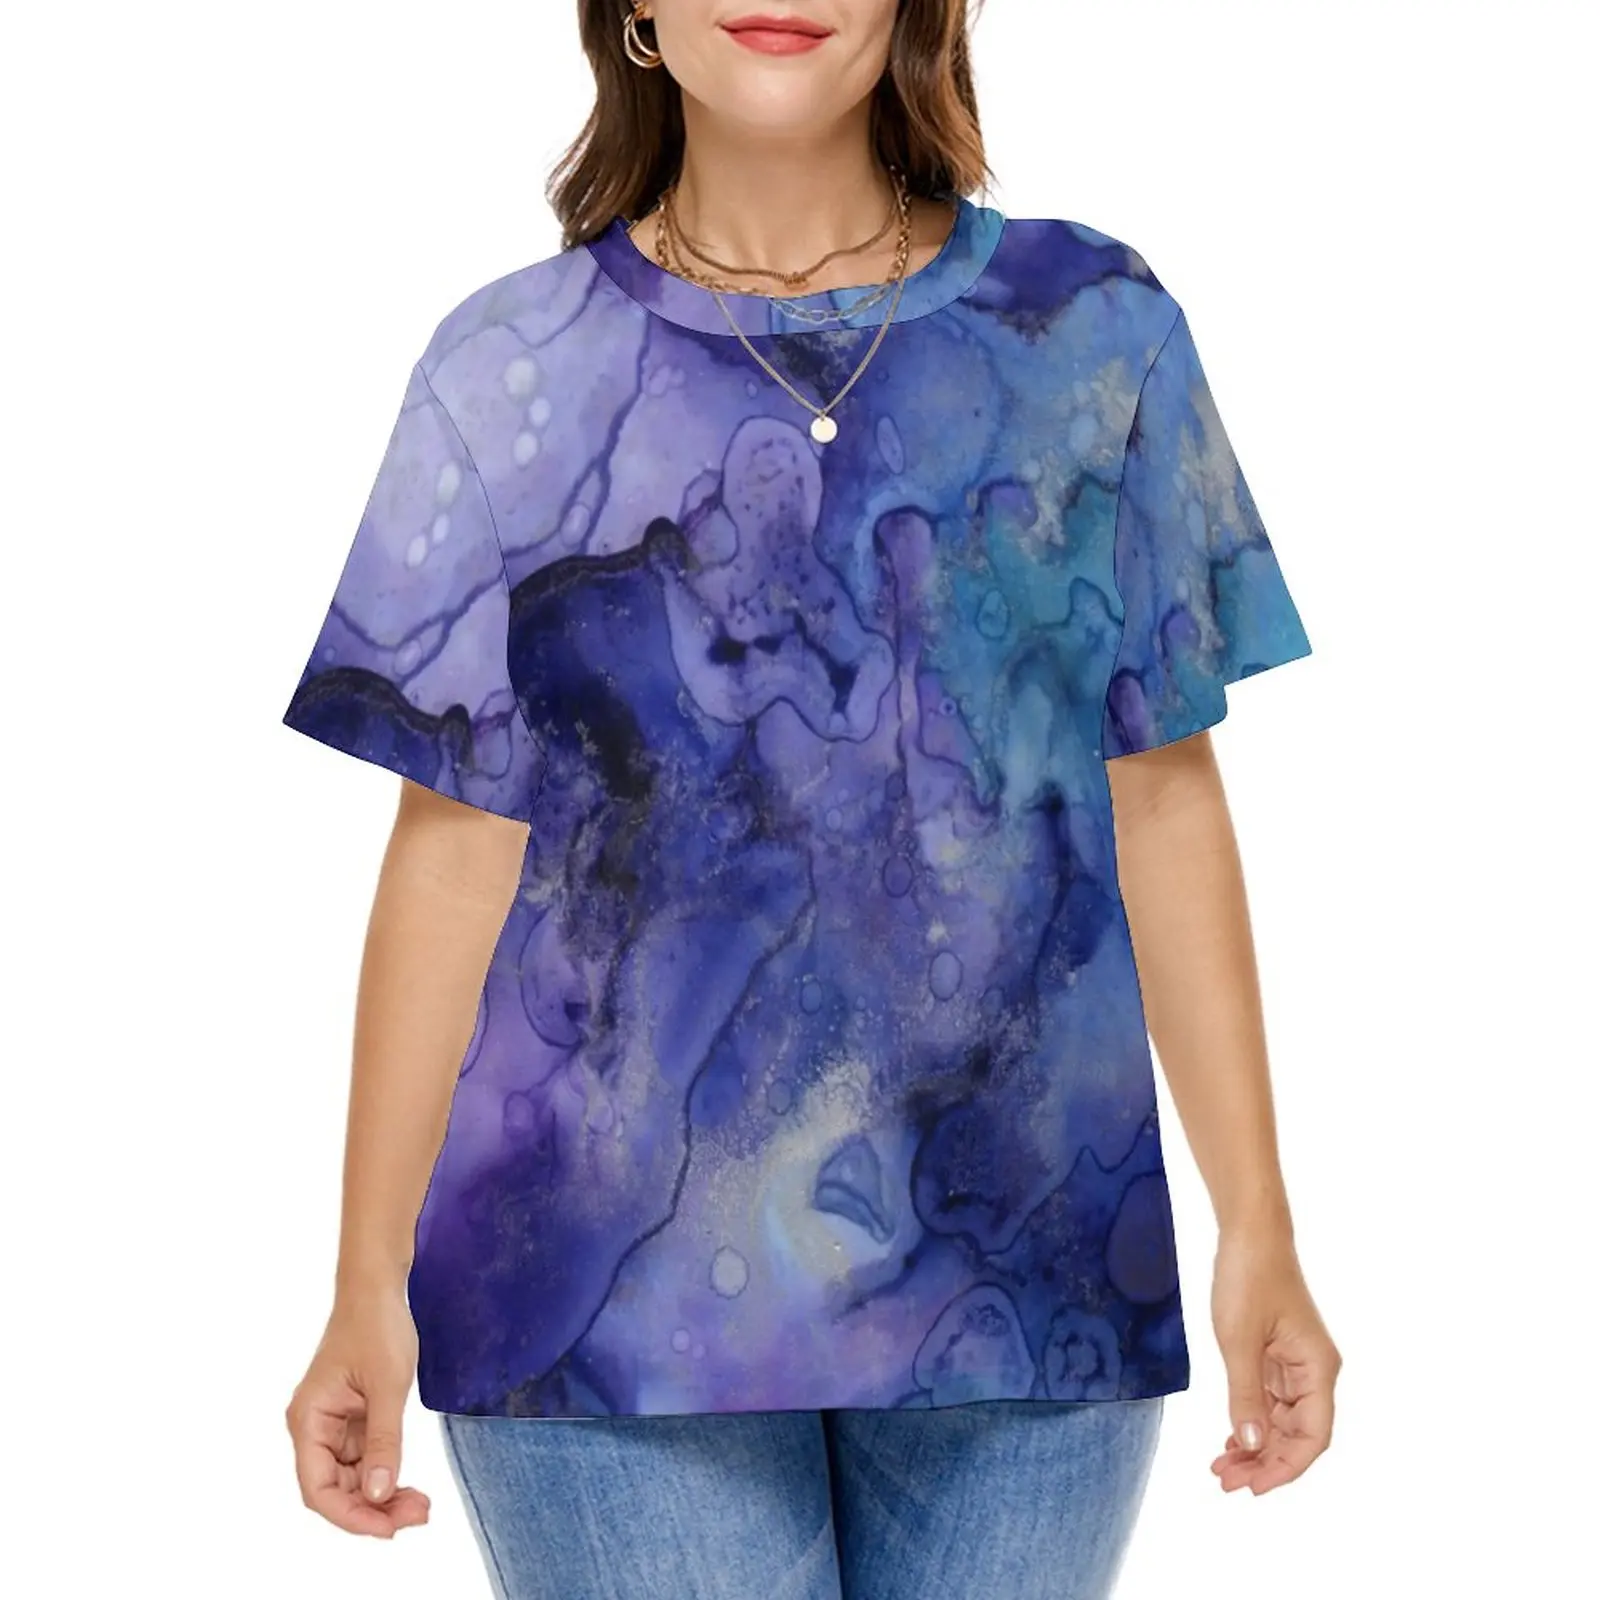 Marbled Abstract Print T-Shirt Blue and Purple Liquid Cool T Shirts Short Sleeve Tees Sexy Graphic Clothes Plus Size 4XL 5XL